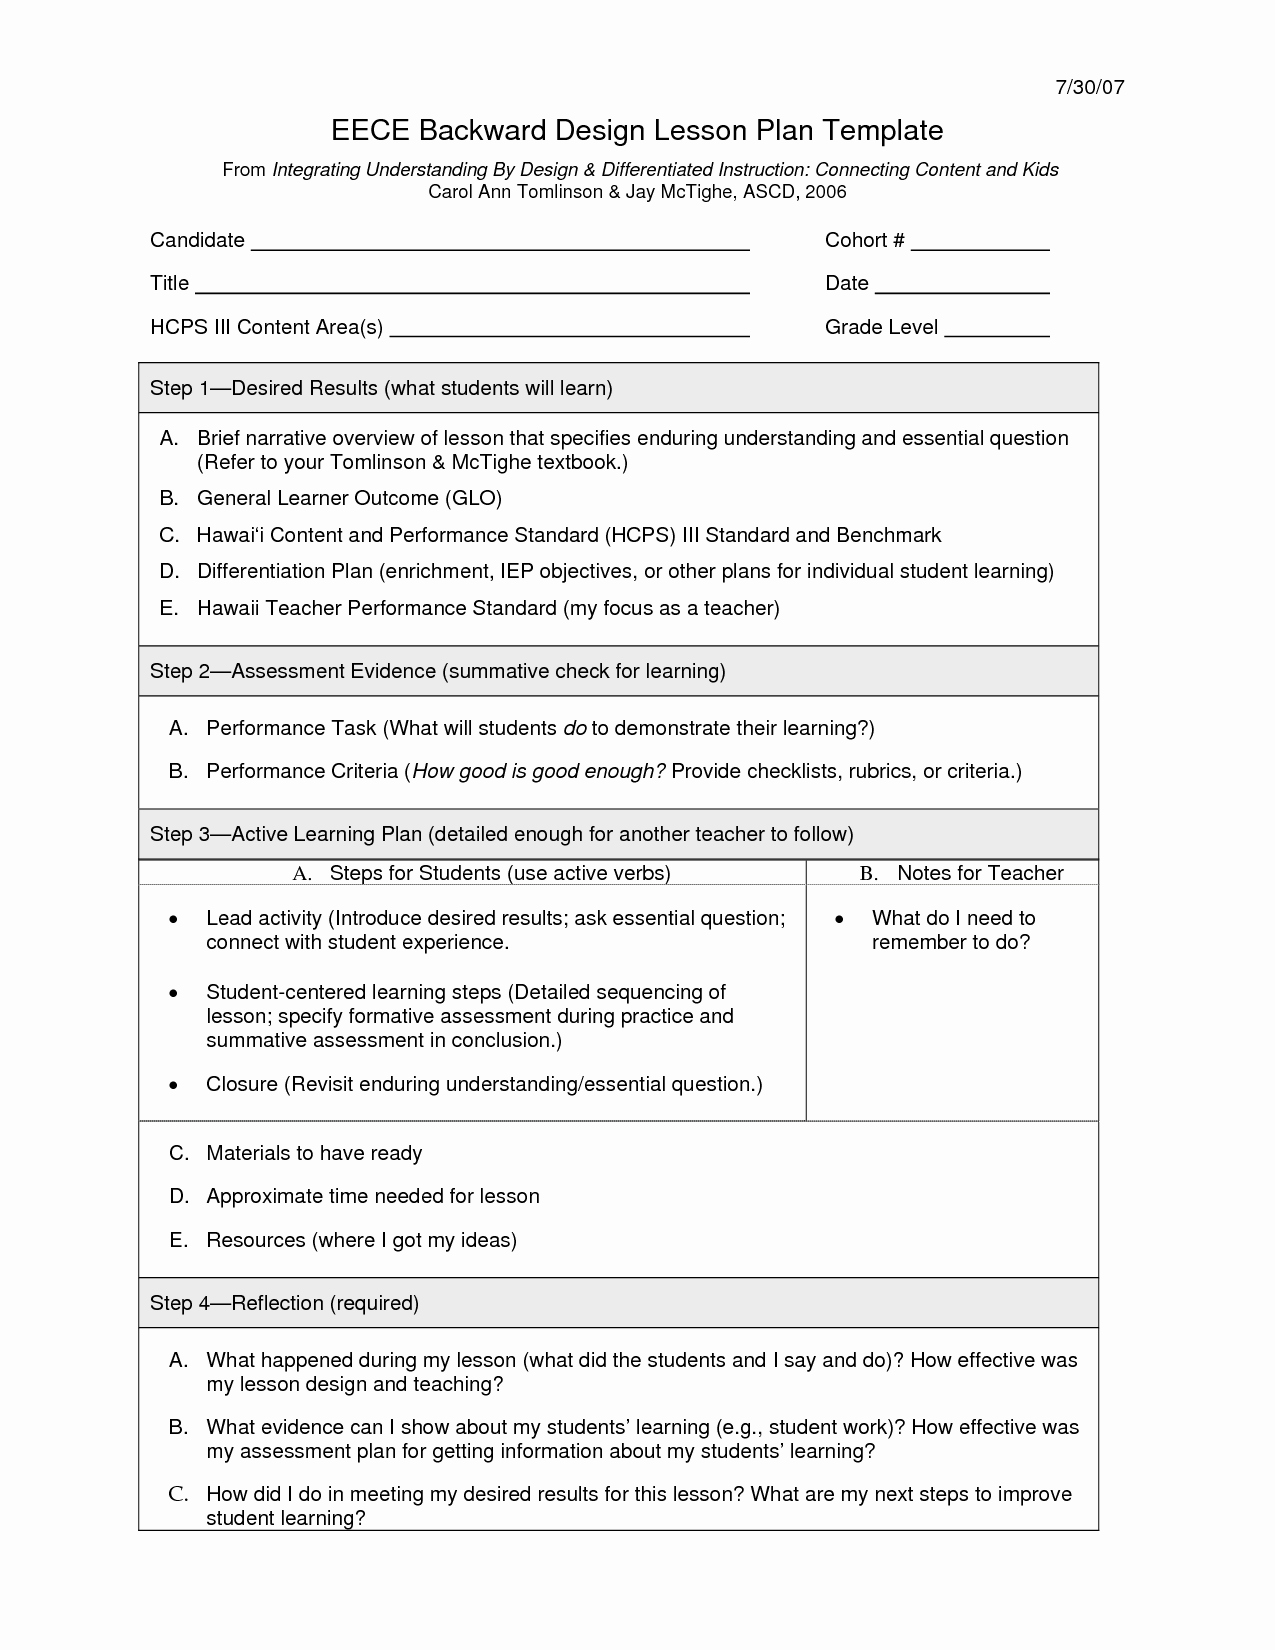 College Lesson Plan Template Lovely Eece Backward Design Unit and Lesson Plan Template Pdf